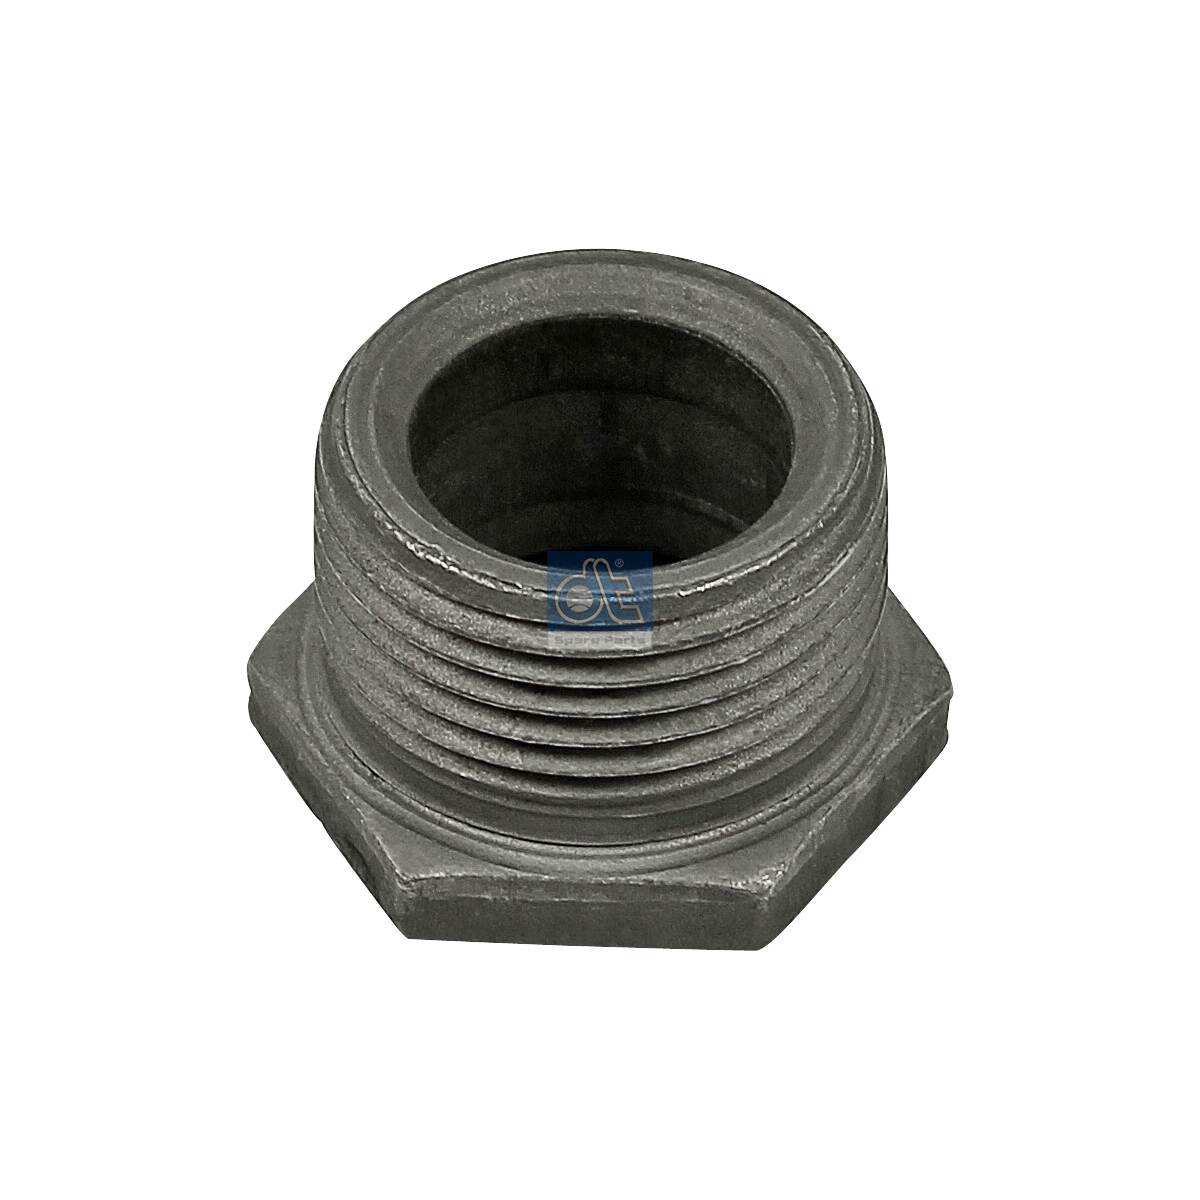 4.40278, Screw, DT Spare Parts, 5410170171, A5410170171, 01.10.134, 103550, 206.361, 87641